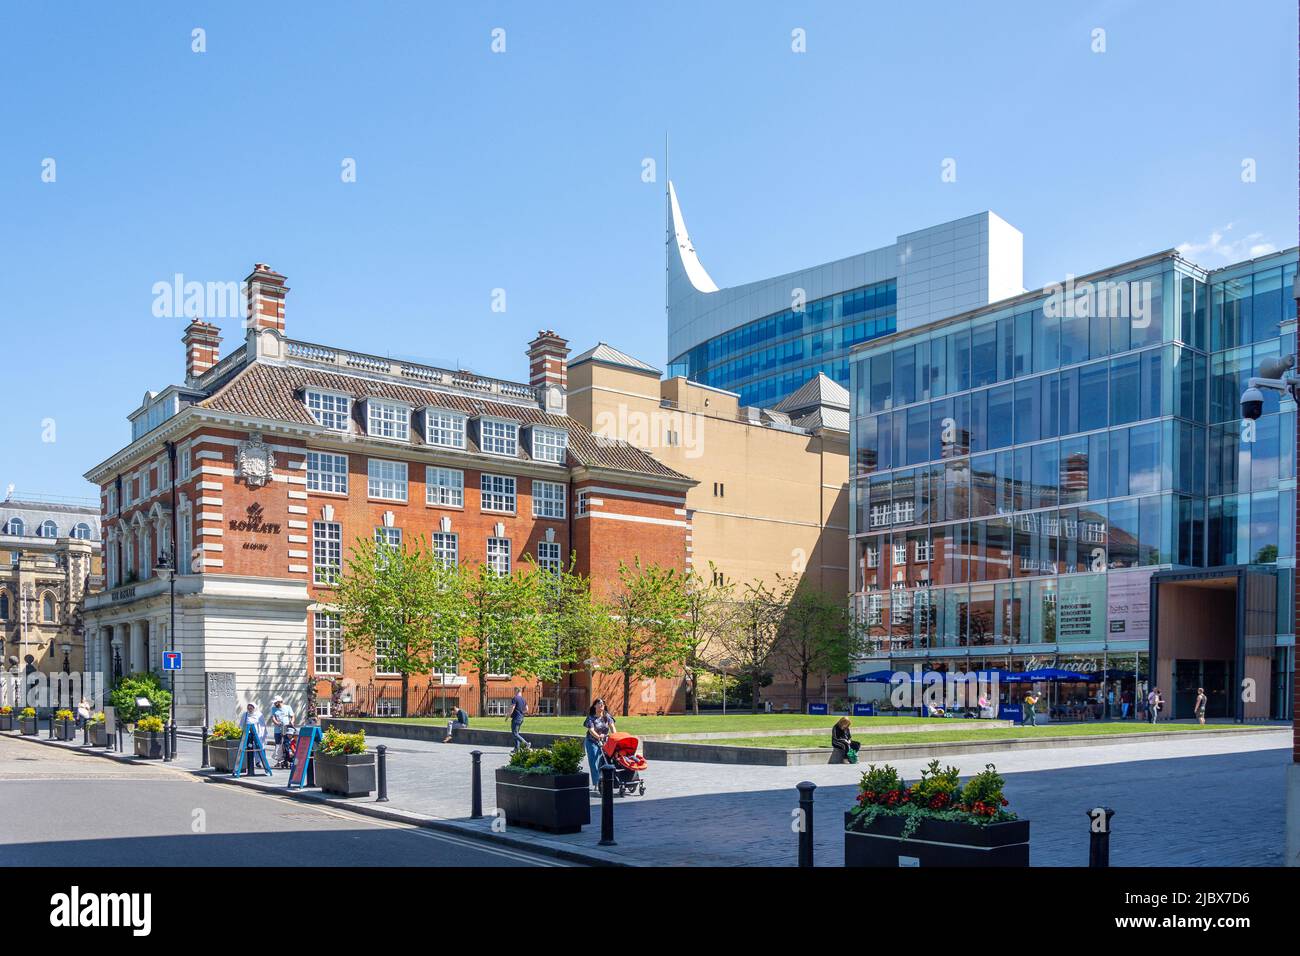 The Roseate Reading Hotel and Carluccio's restaurant, The Forbury, Reading, Berkshire, England, United Kingdom Stock Photo